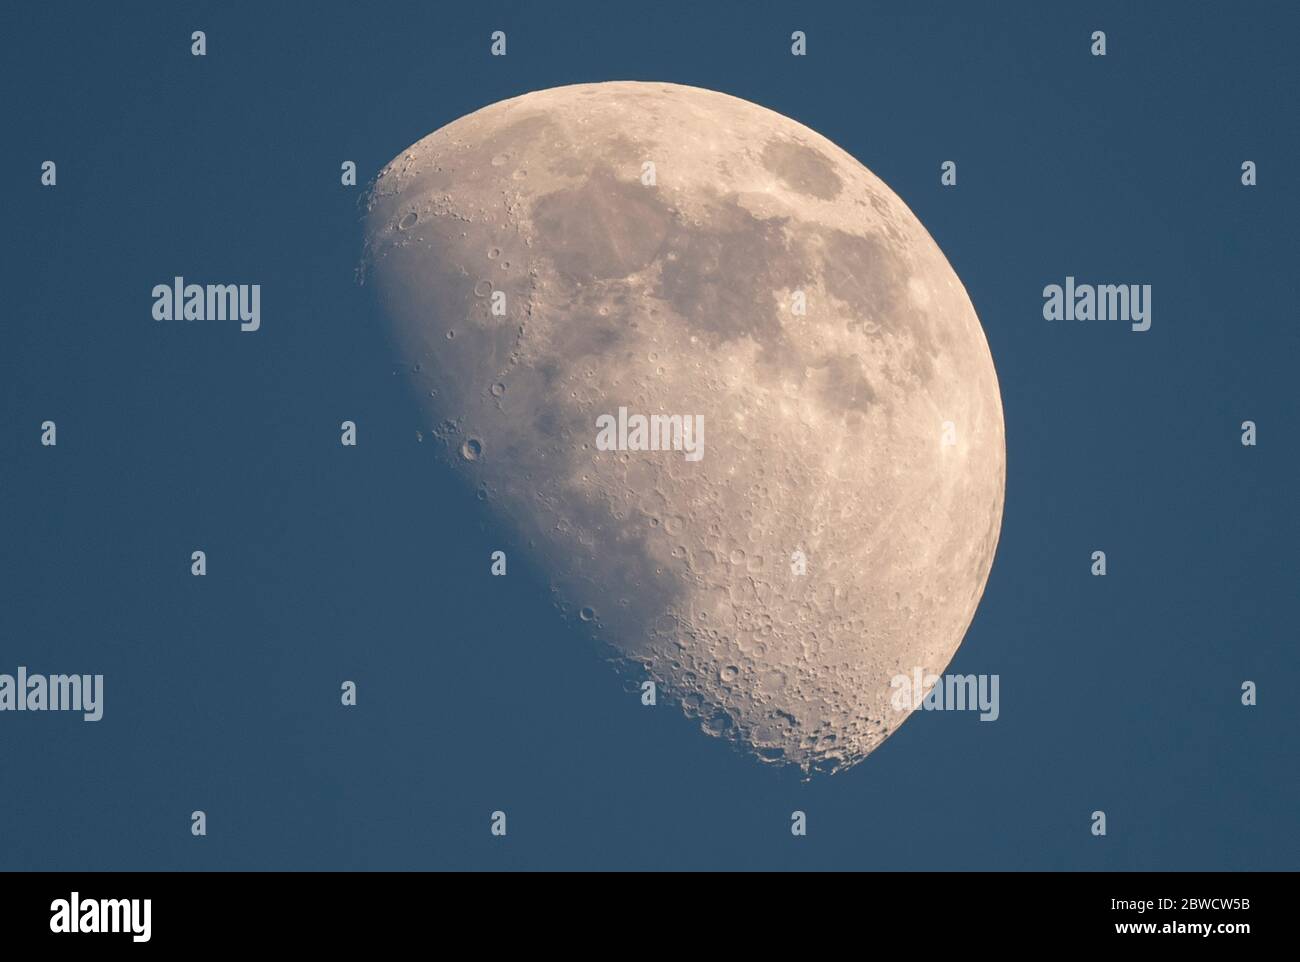 London, UK. 31 May 2020. Waxing gibbous moon directly overhead in clear evening sky over London with the prominent crater Copernicus visible at the terminator to left of centre. Credit: Malcolm Park/Alamy Live News Stock Photo